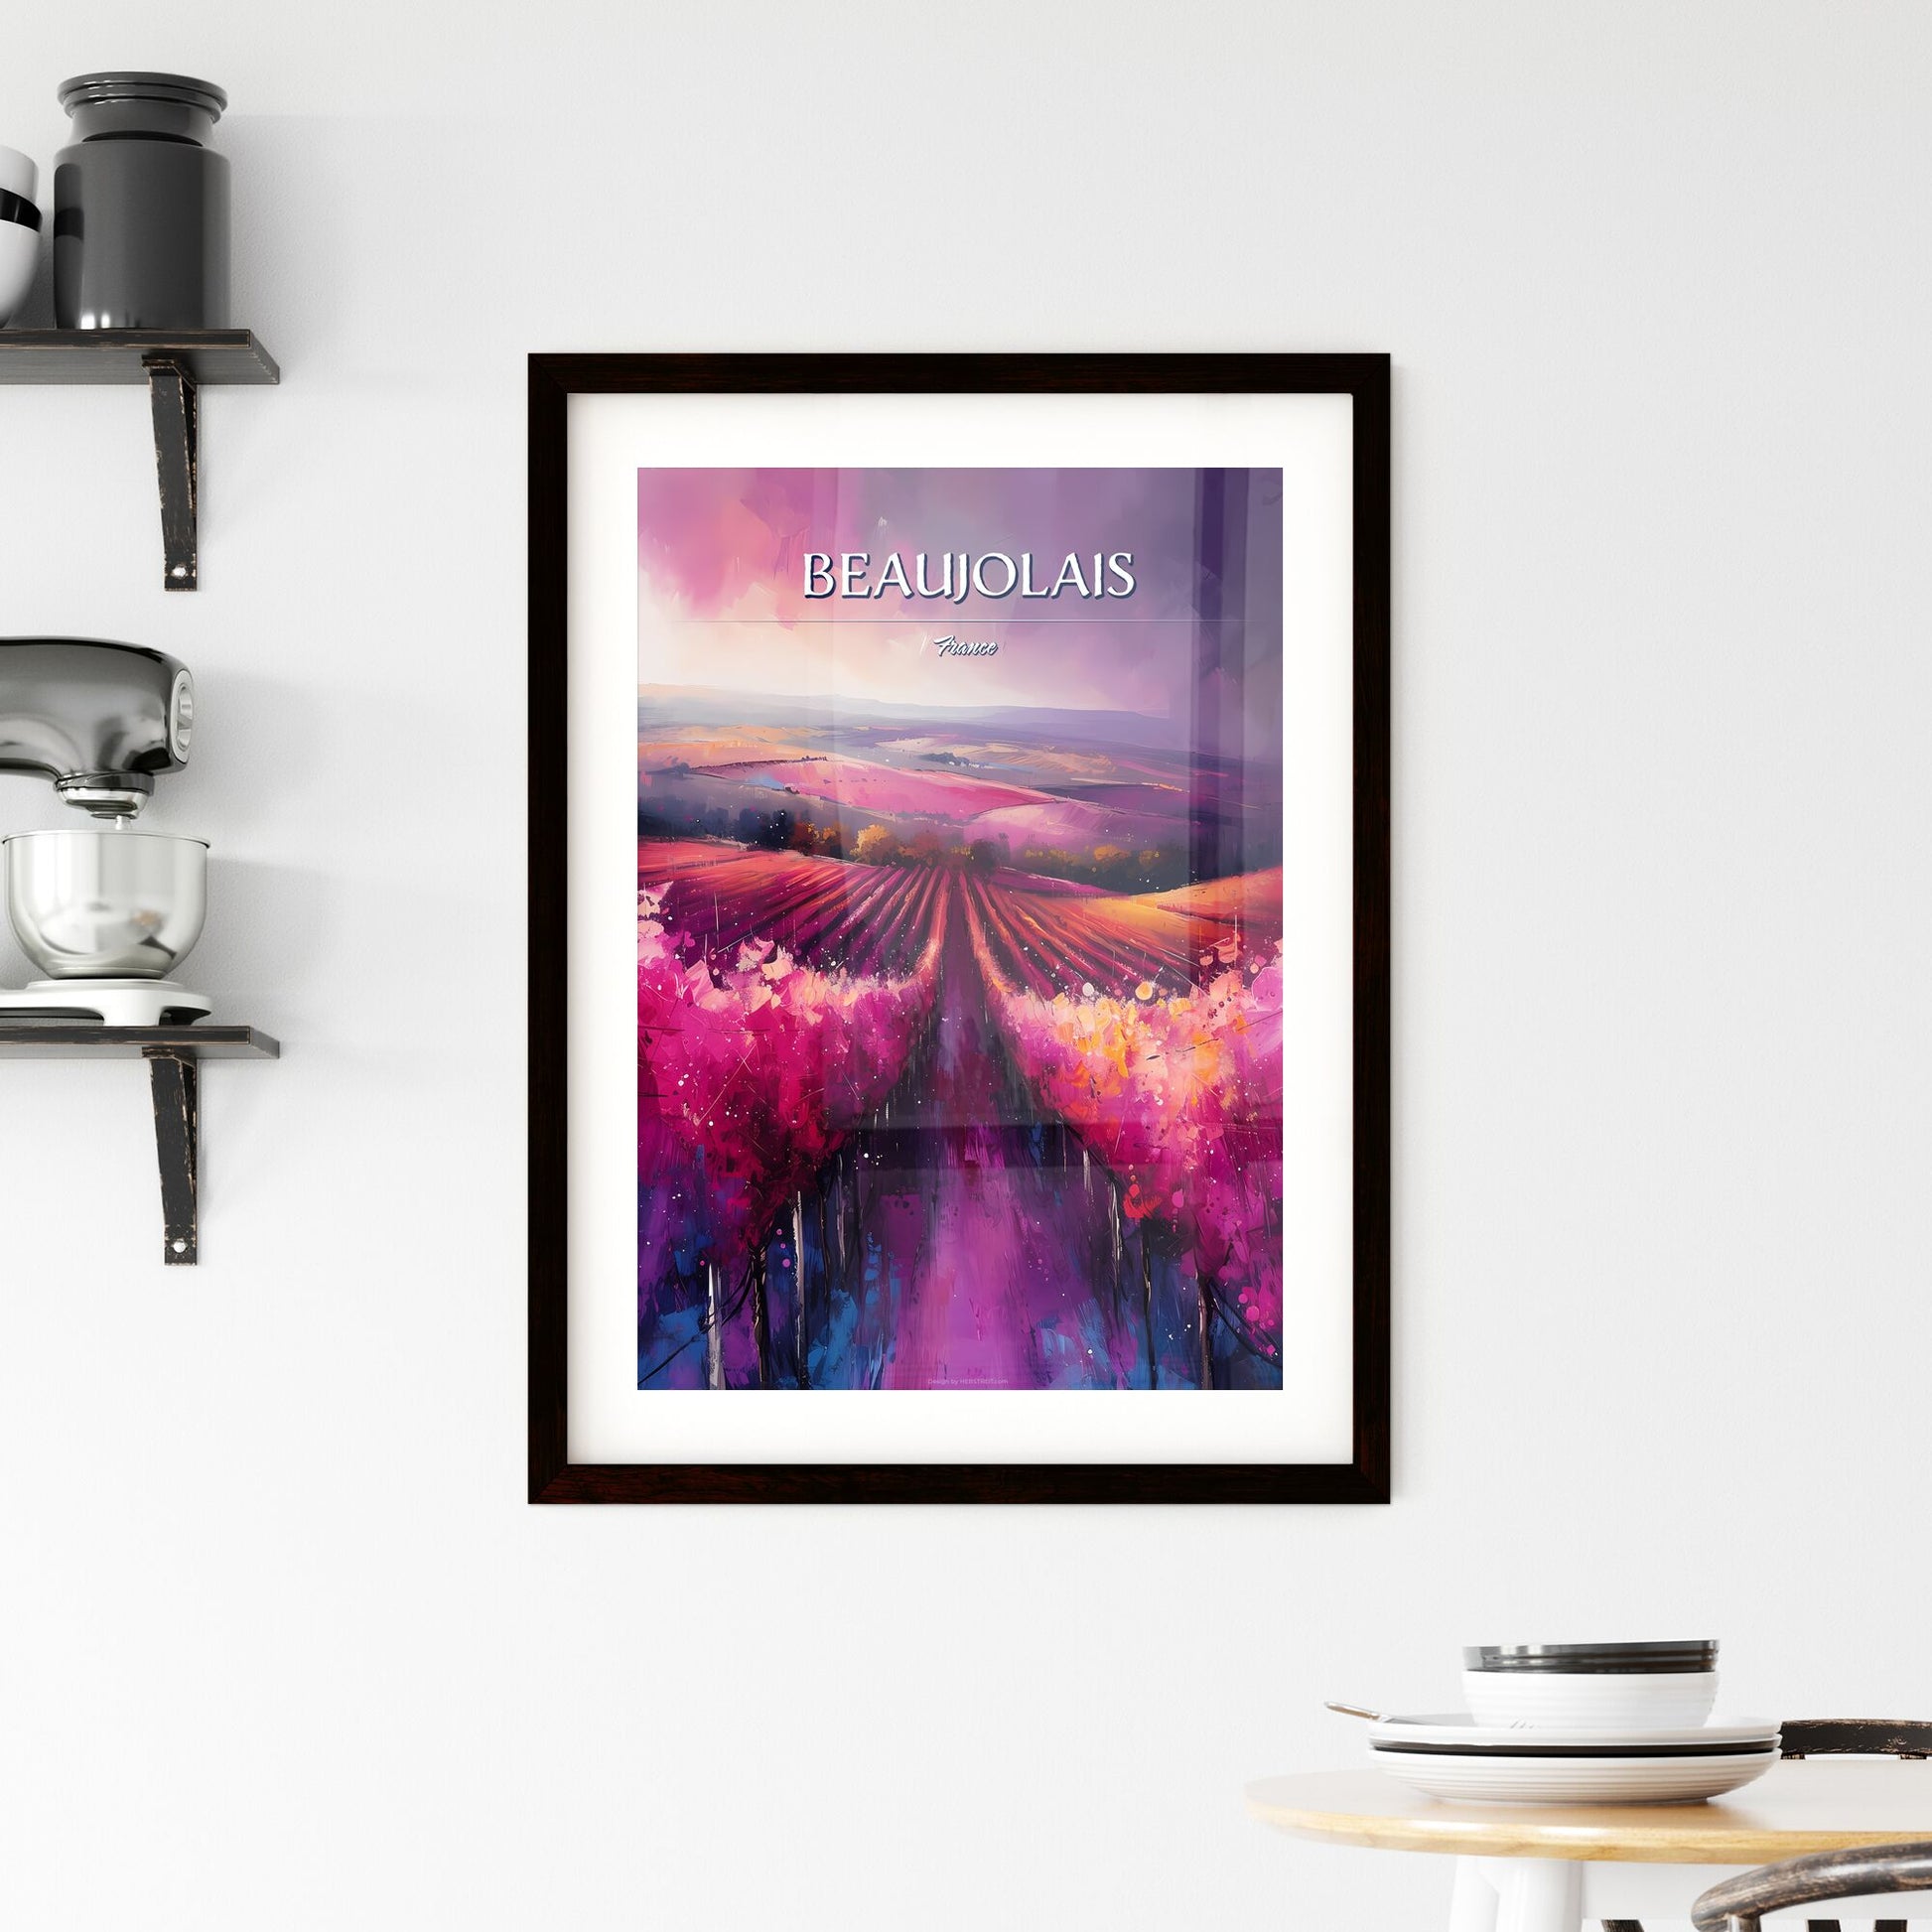 Beaujolais, France - Art print of a painting of a field of pink flowers Default Title